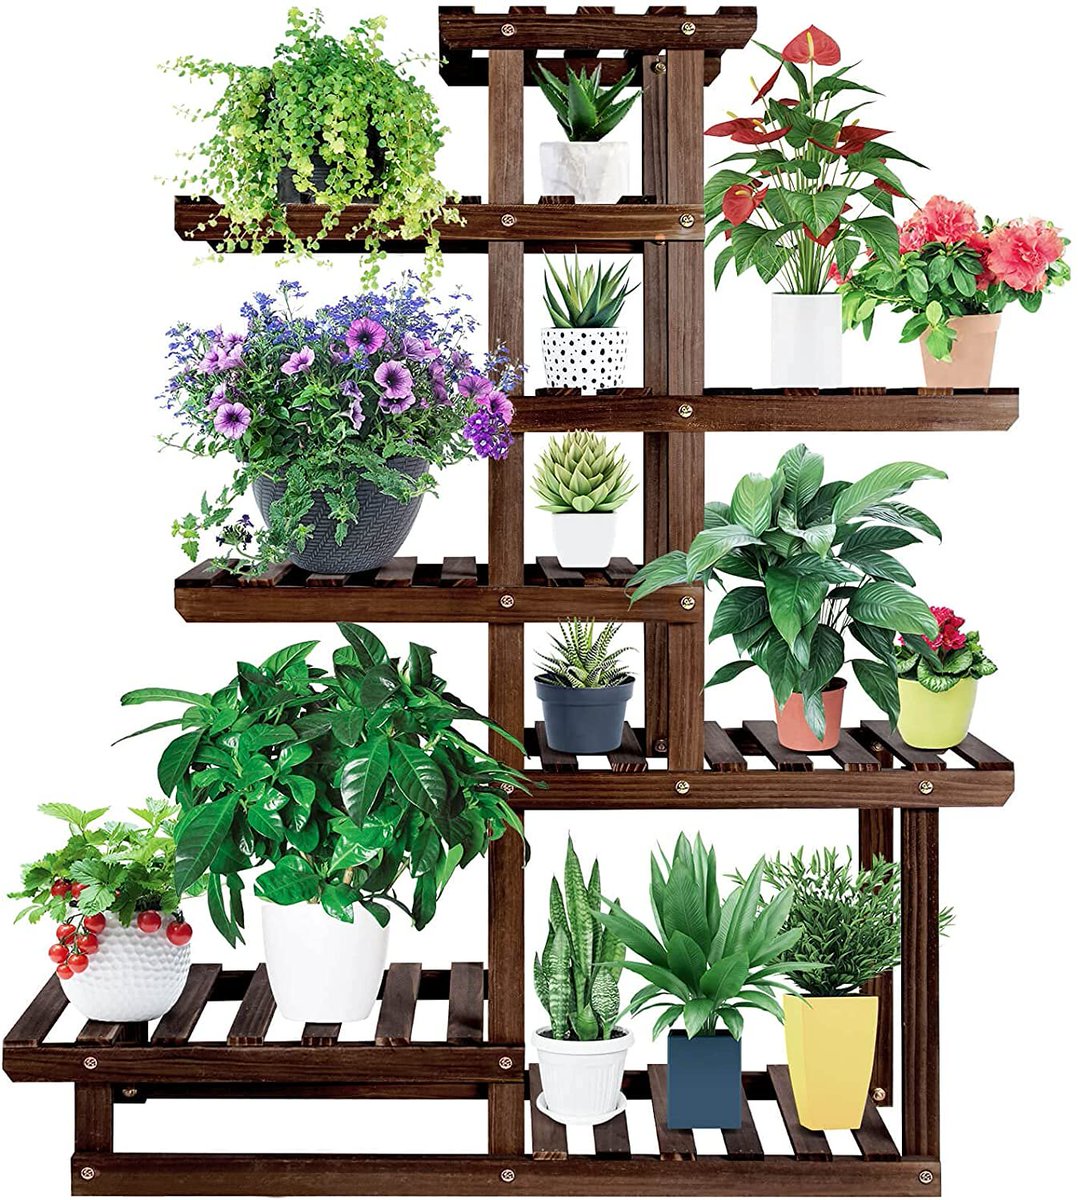 Wood Plant Stand, 7 Tier Tall Shelf Plant Holder

Only $33.99!!

Use Promo Code RBCRWR5M

